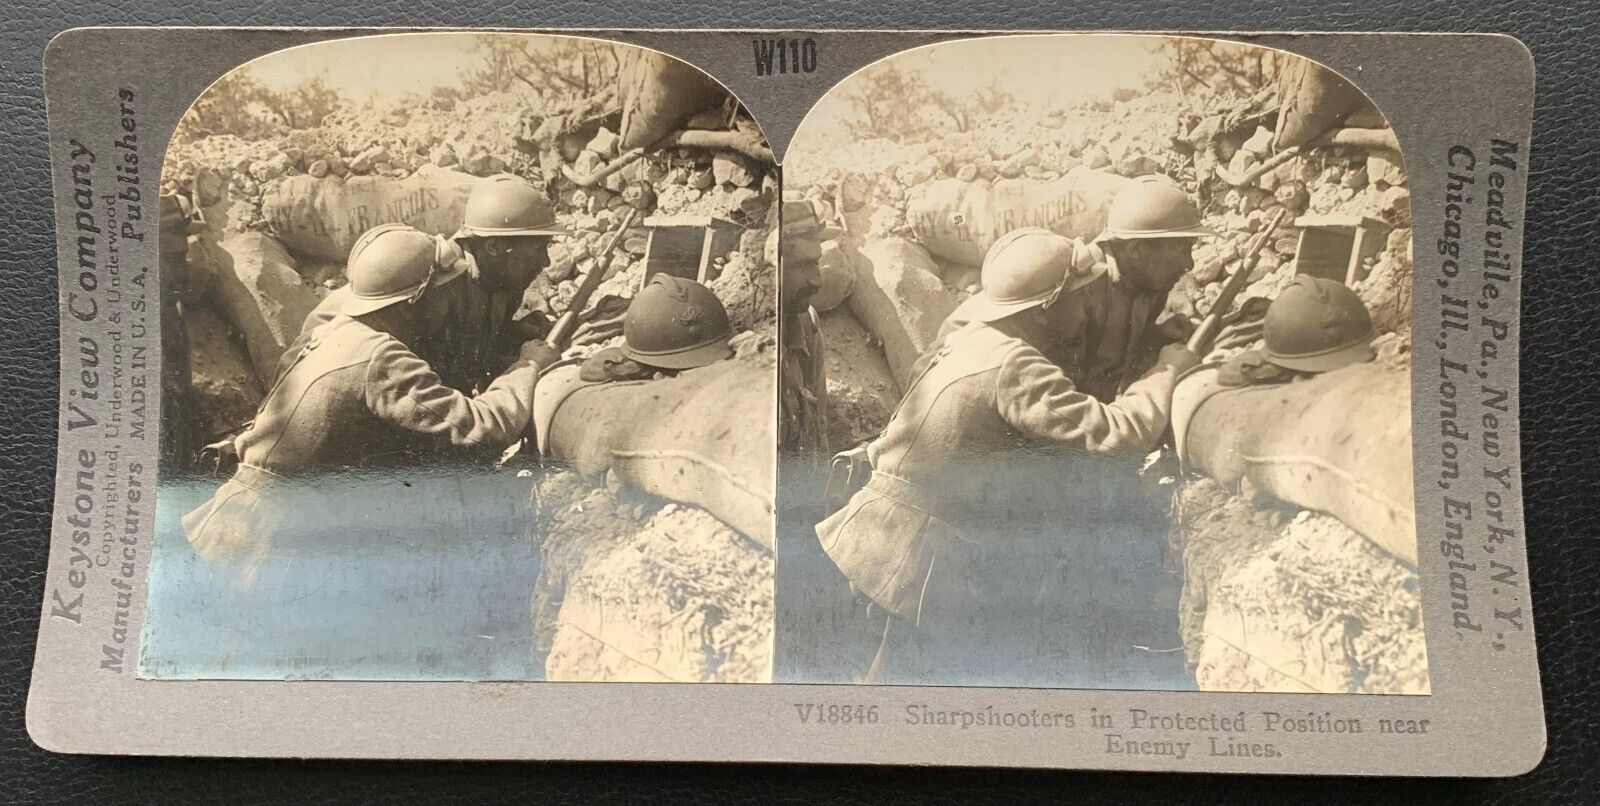 SHARPSHOOTERS IN PROTECTED POSITION NEAR ENEMY LINE WW1 KEYSTONE STEREOVIEW W110